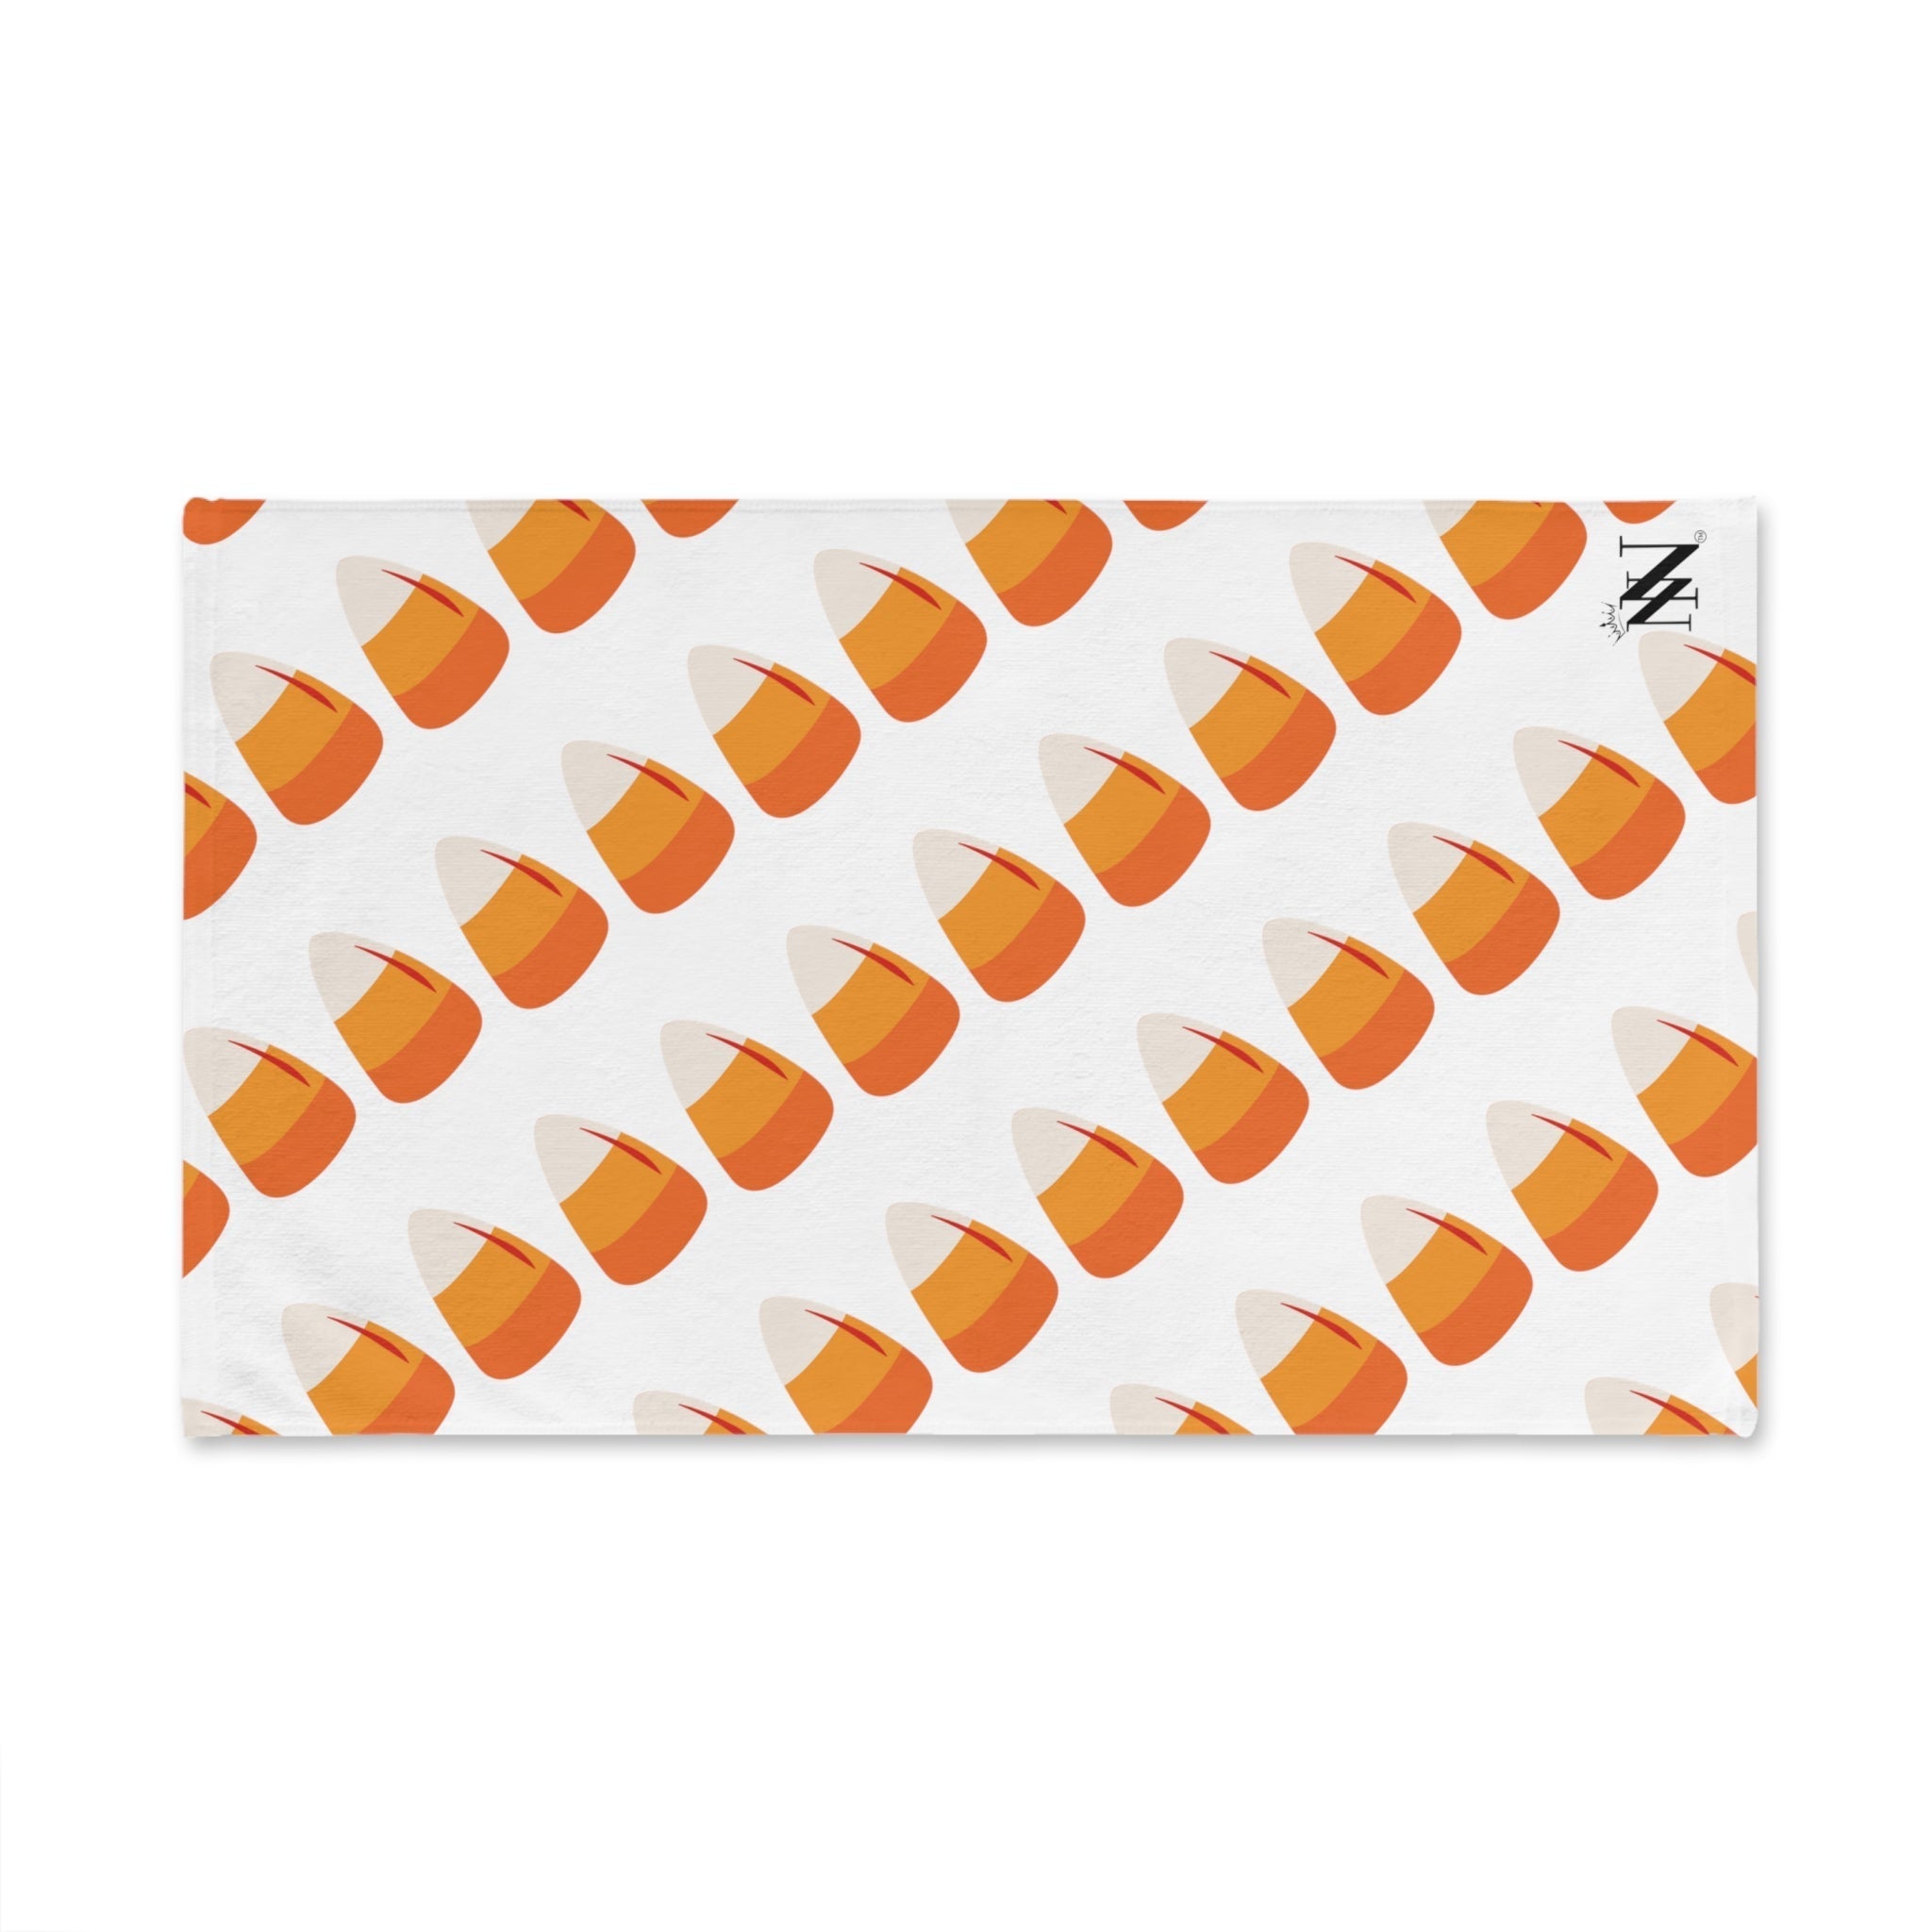 Candy Corn White | Funny Gifts for Men - Gifts for Him - Birthday Gifts for Men, Him, Her, Husband, Boyfriend, Girlfriend, New Couple Gifts, Fathers & Valentines Day Gifts, Christmas Gifts NECTAR NAPKINS